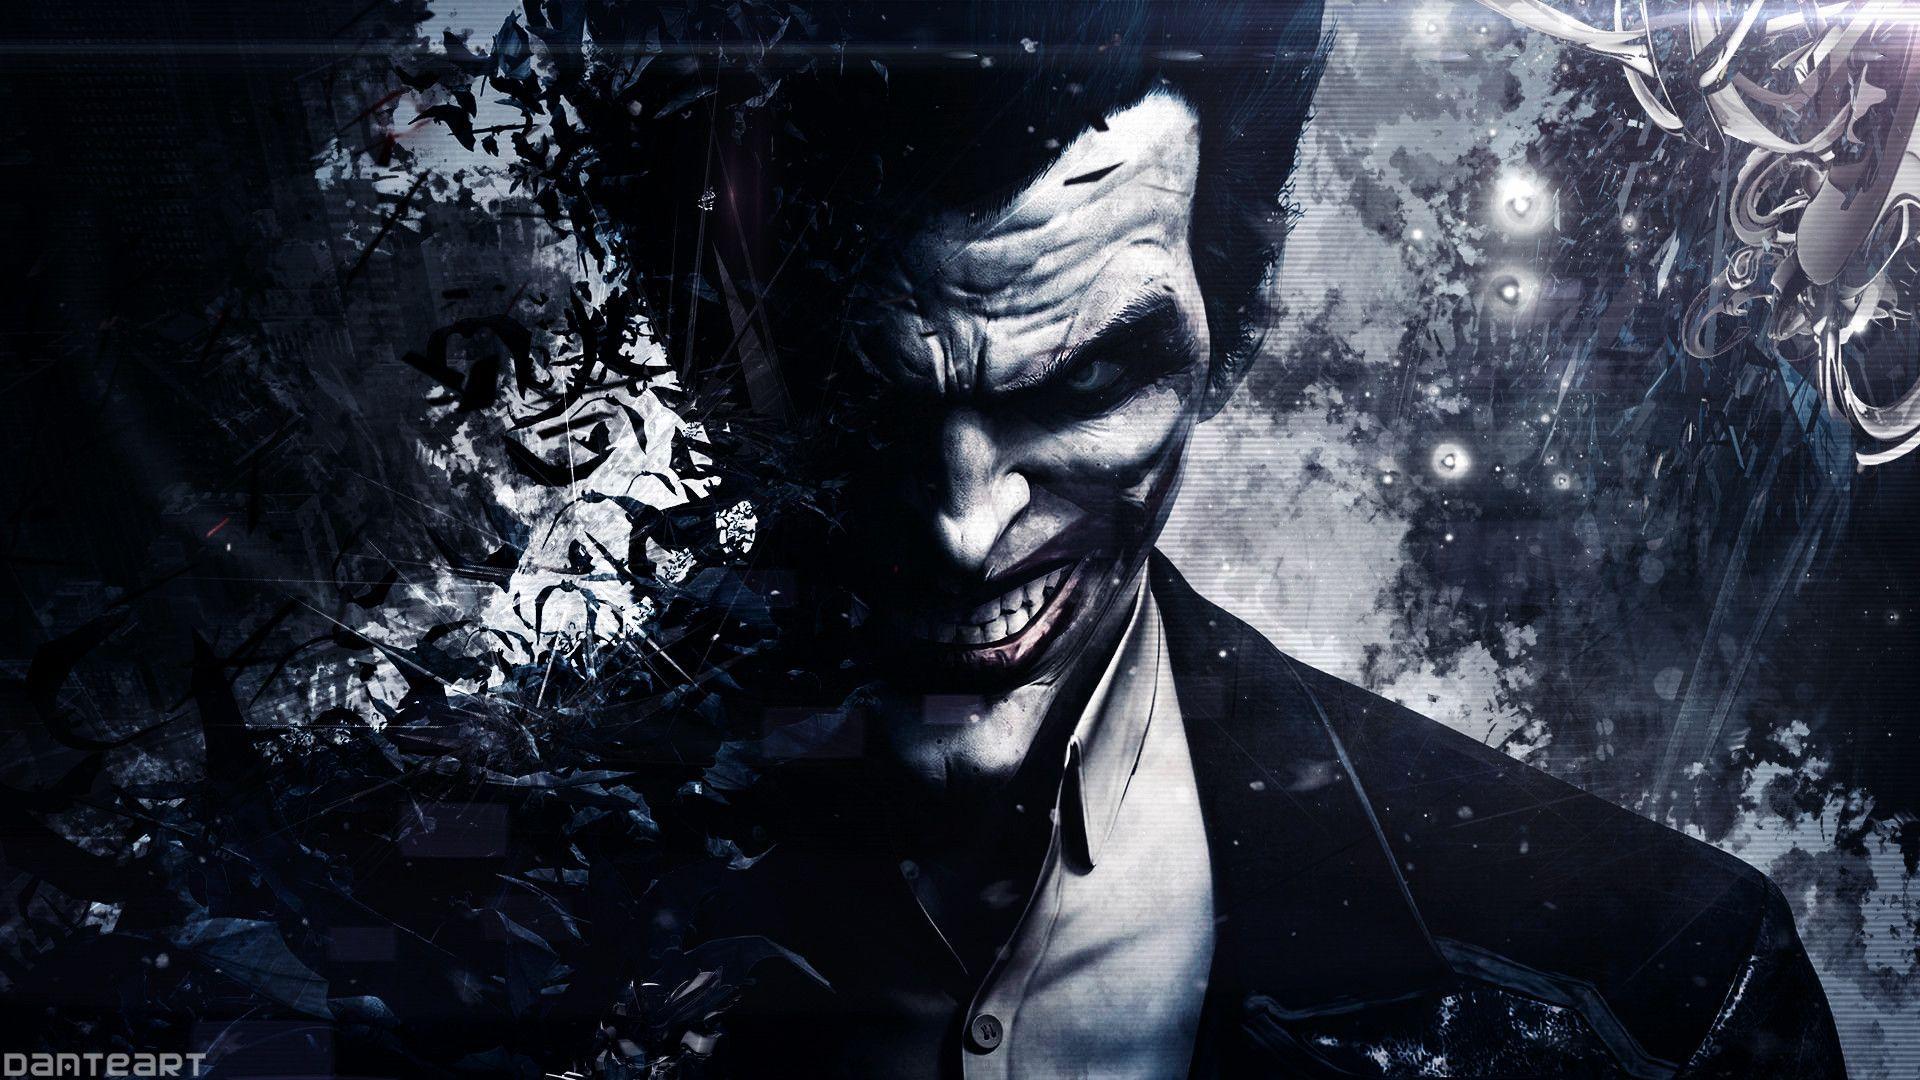  download Batman And Joker Wallpapers [1920x1080] for your 1920x1080